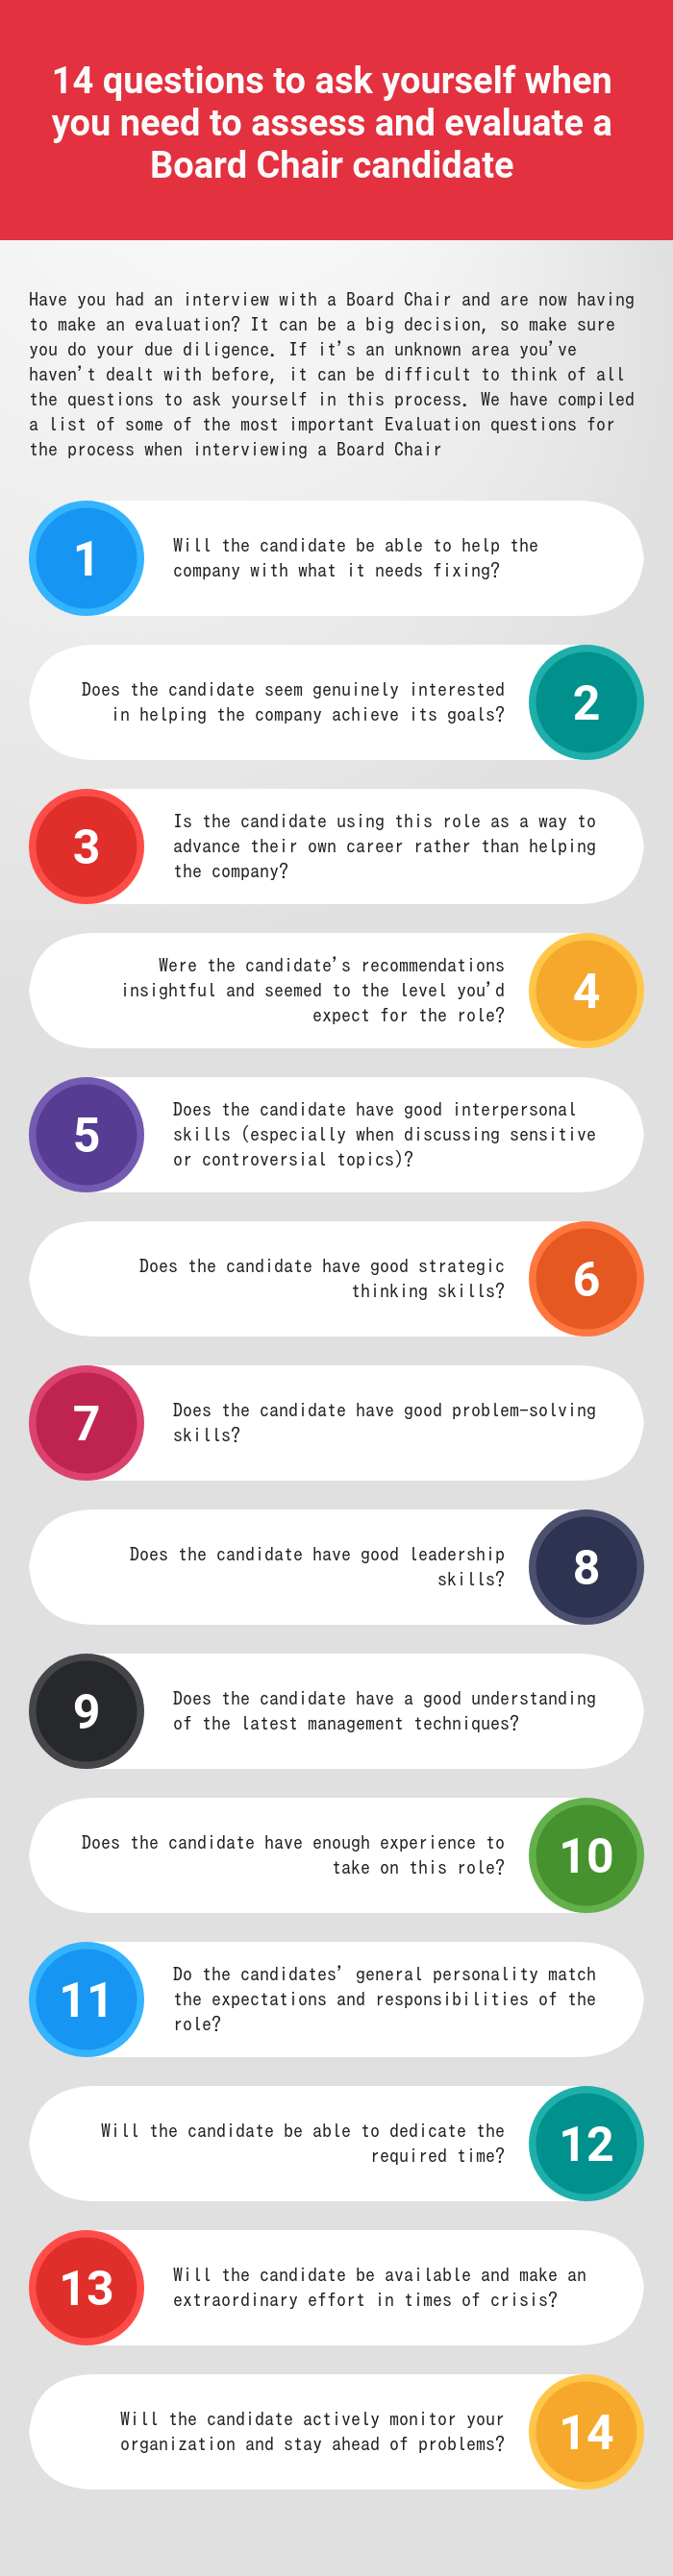 14 questions to ask yourself when you need to assess and evaluate a Board Chair candidate